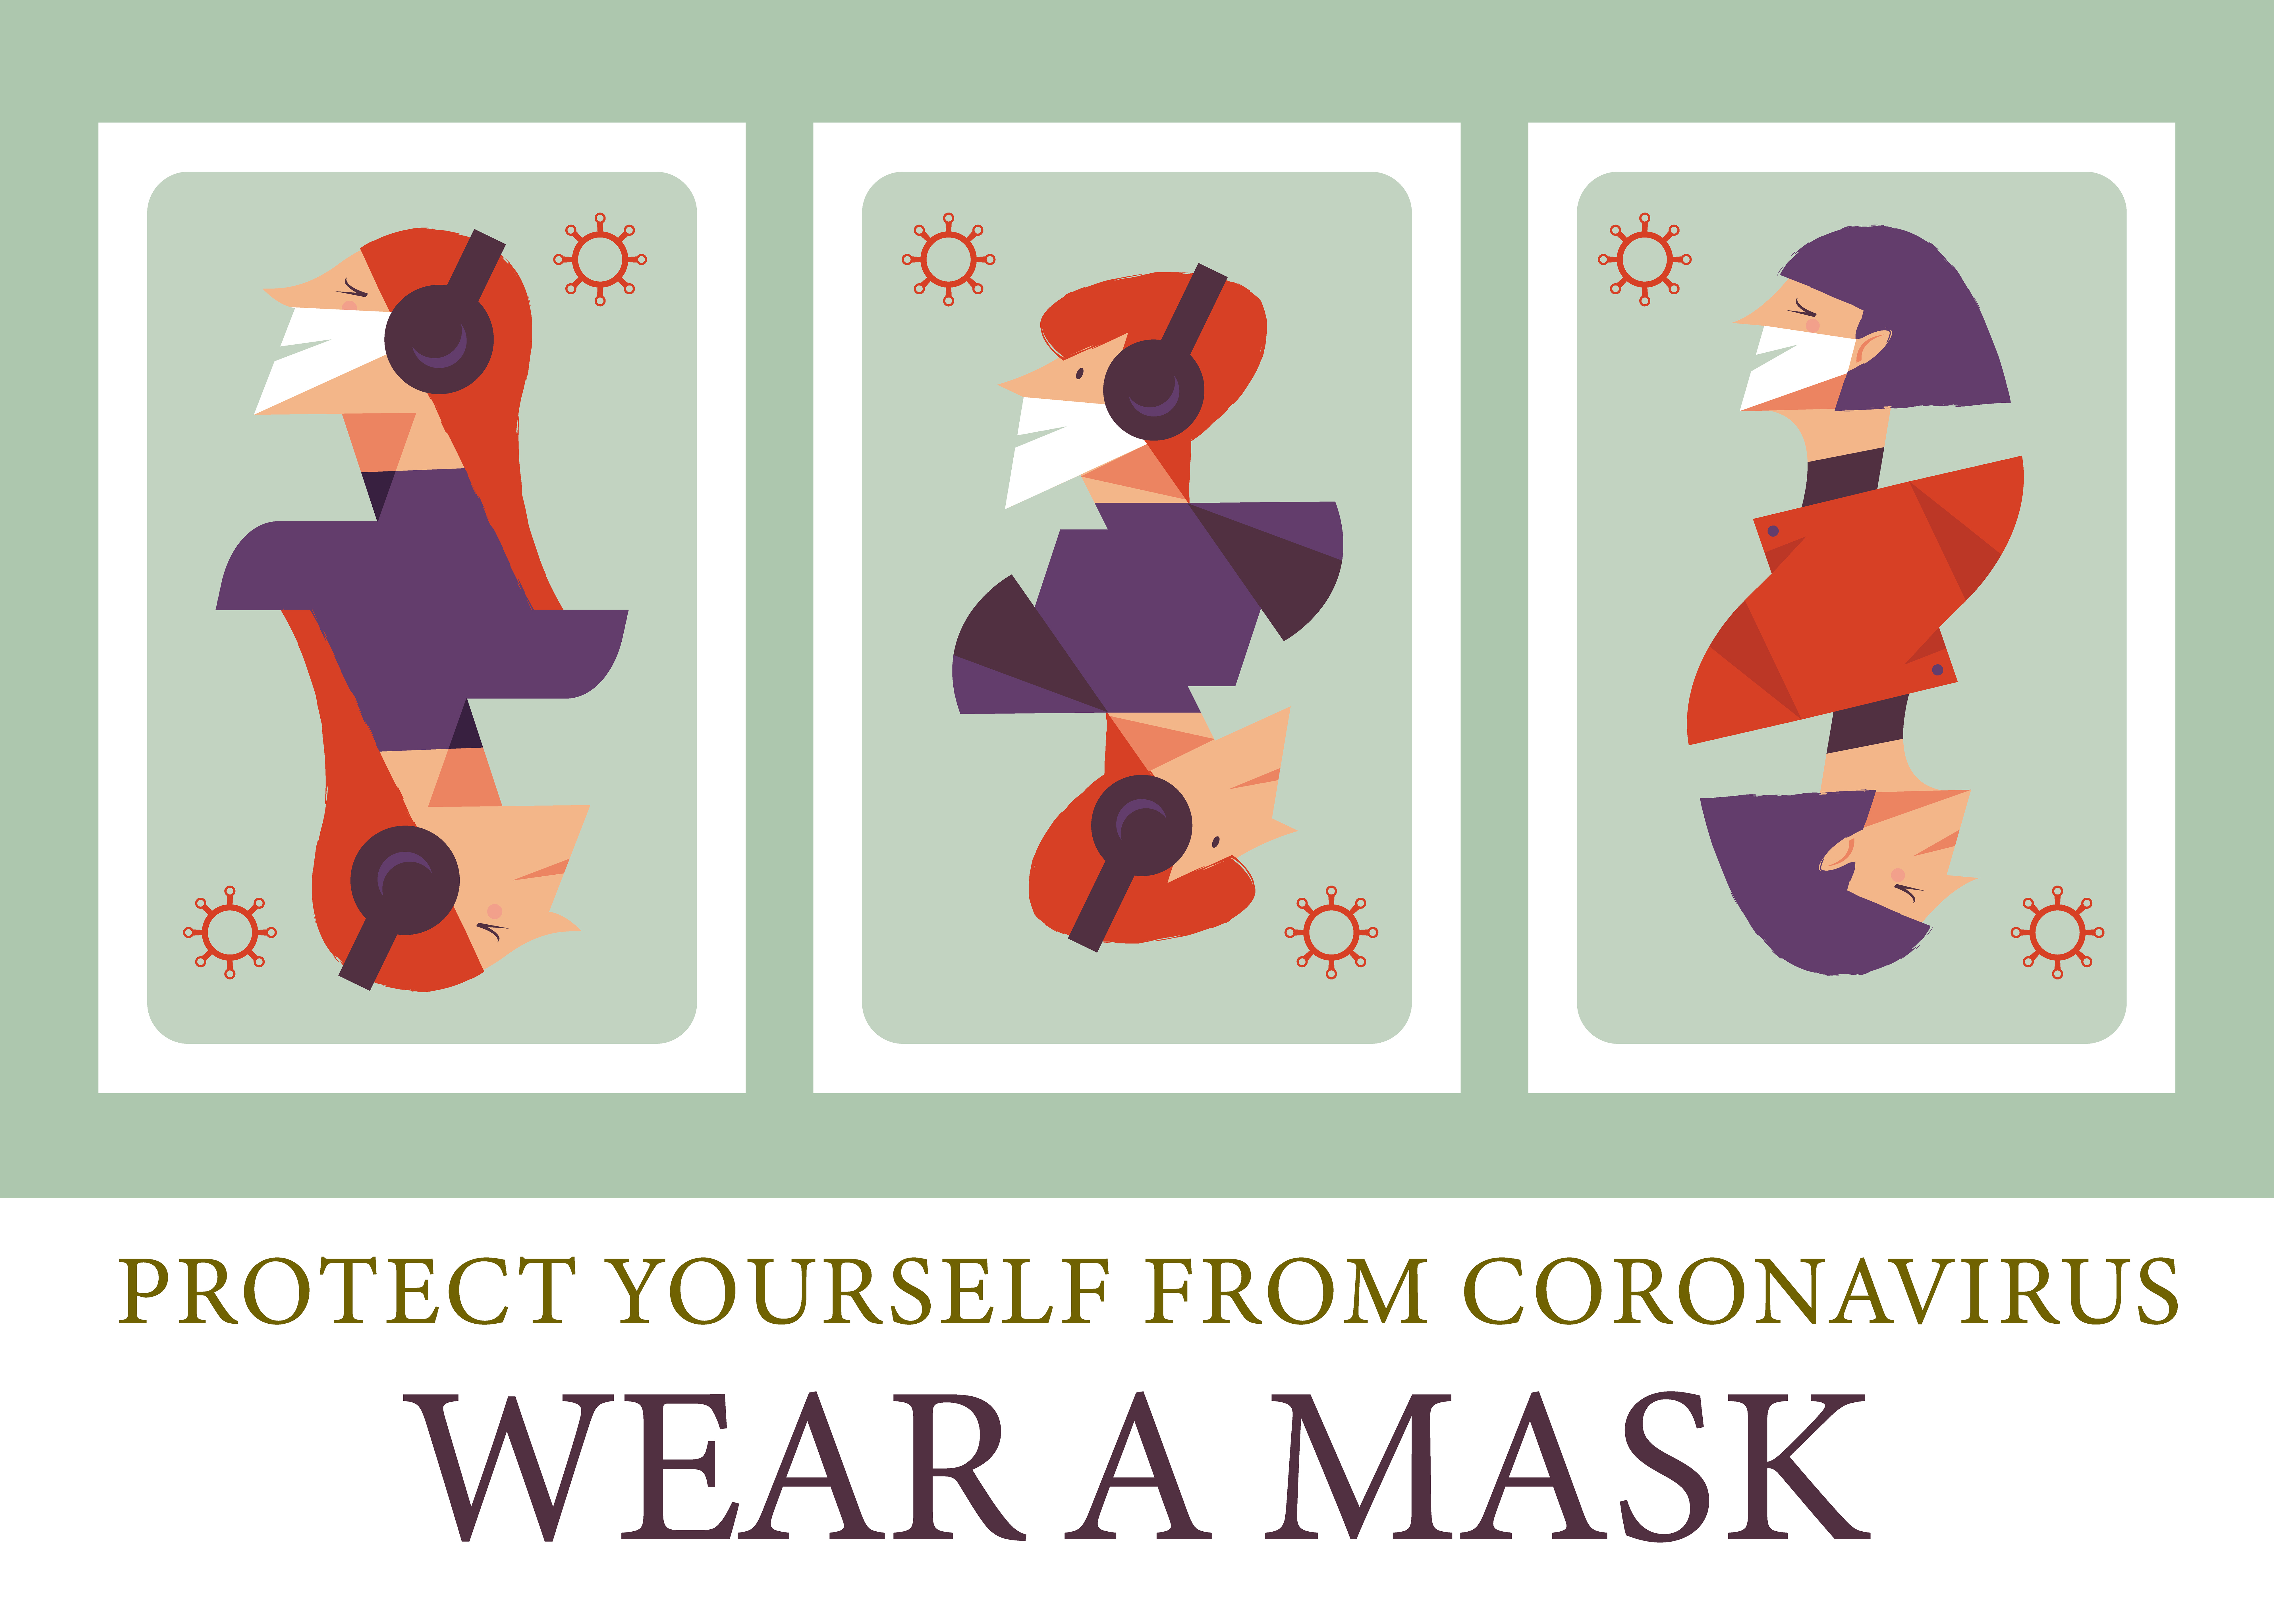 A man and a girl in medical masks. Please put on your mask. Vector poster encouraging people to wear masks during the coronavirus pandemic.. Please put on your mask. Vector poster encouraging people to wear masks during the coronavirus pandemic.